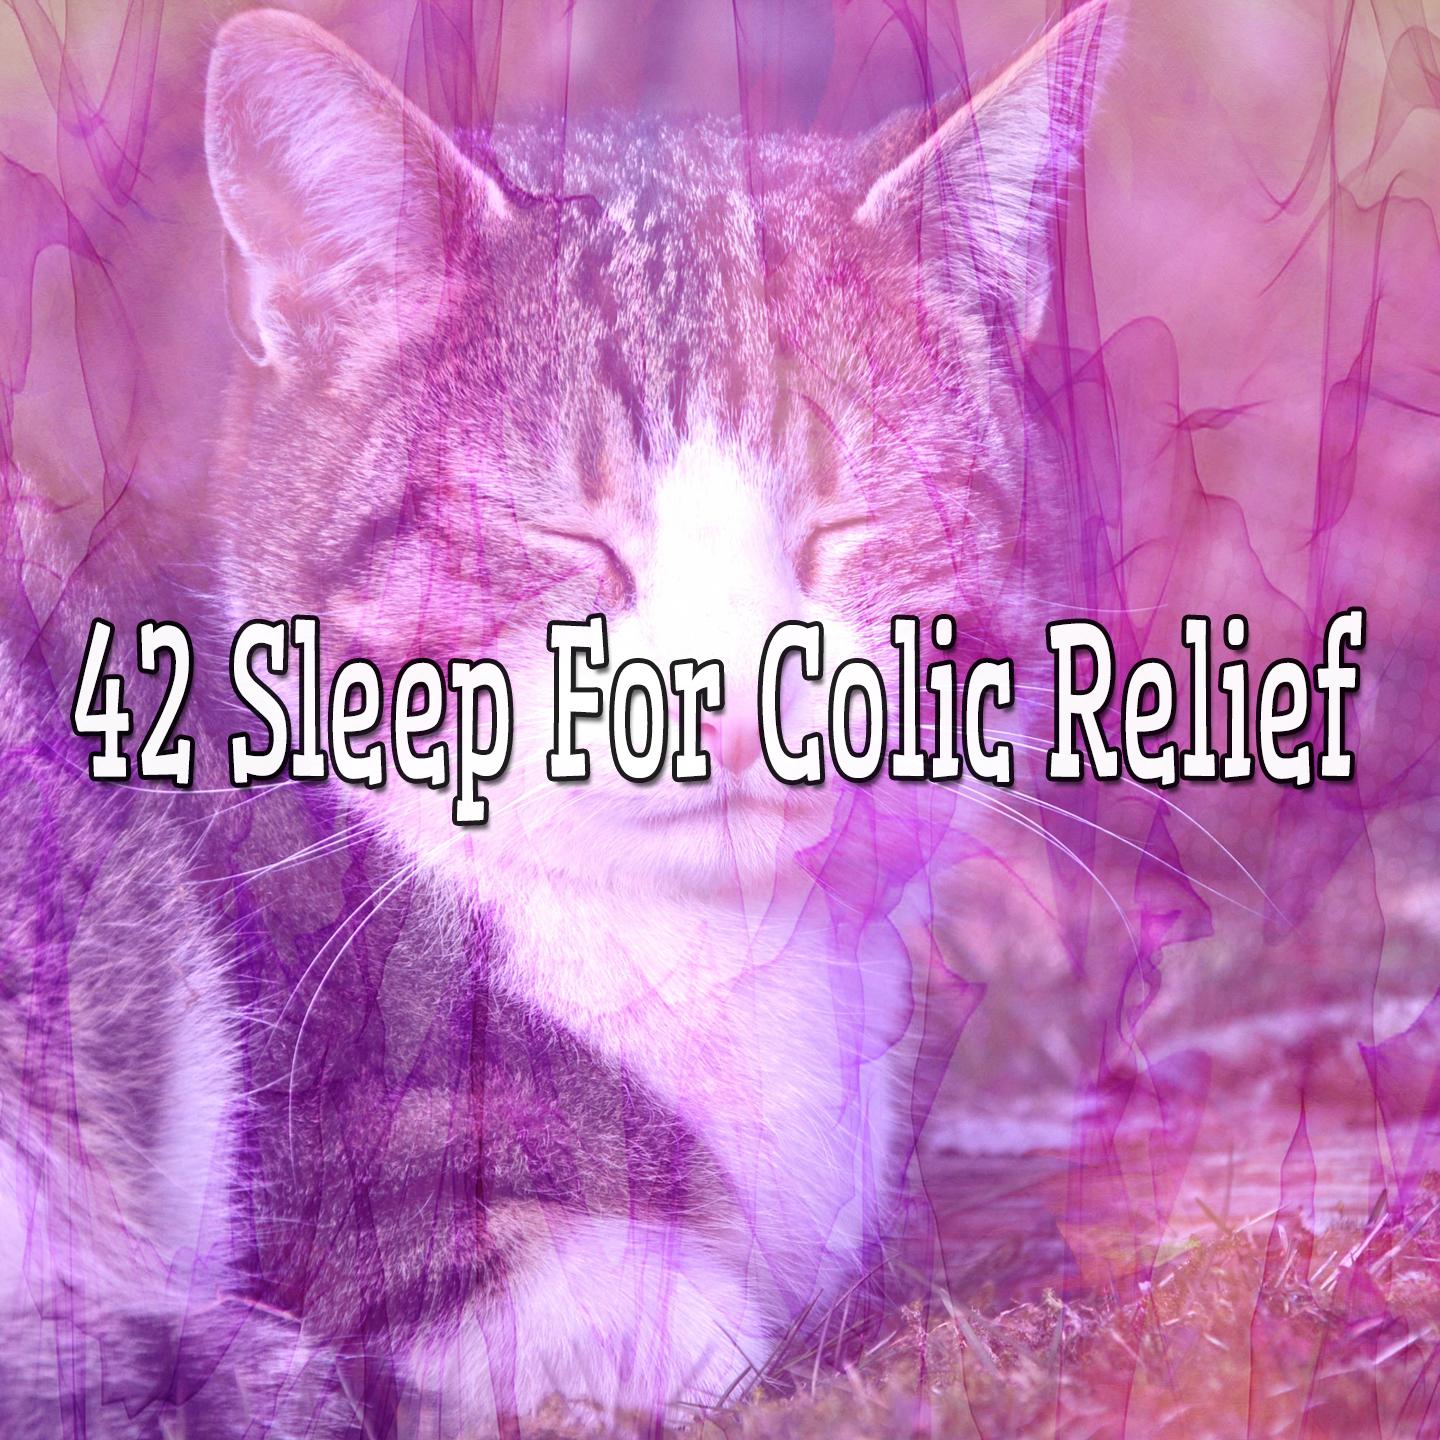 42 Sleep For Colic Relief